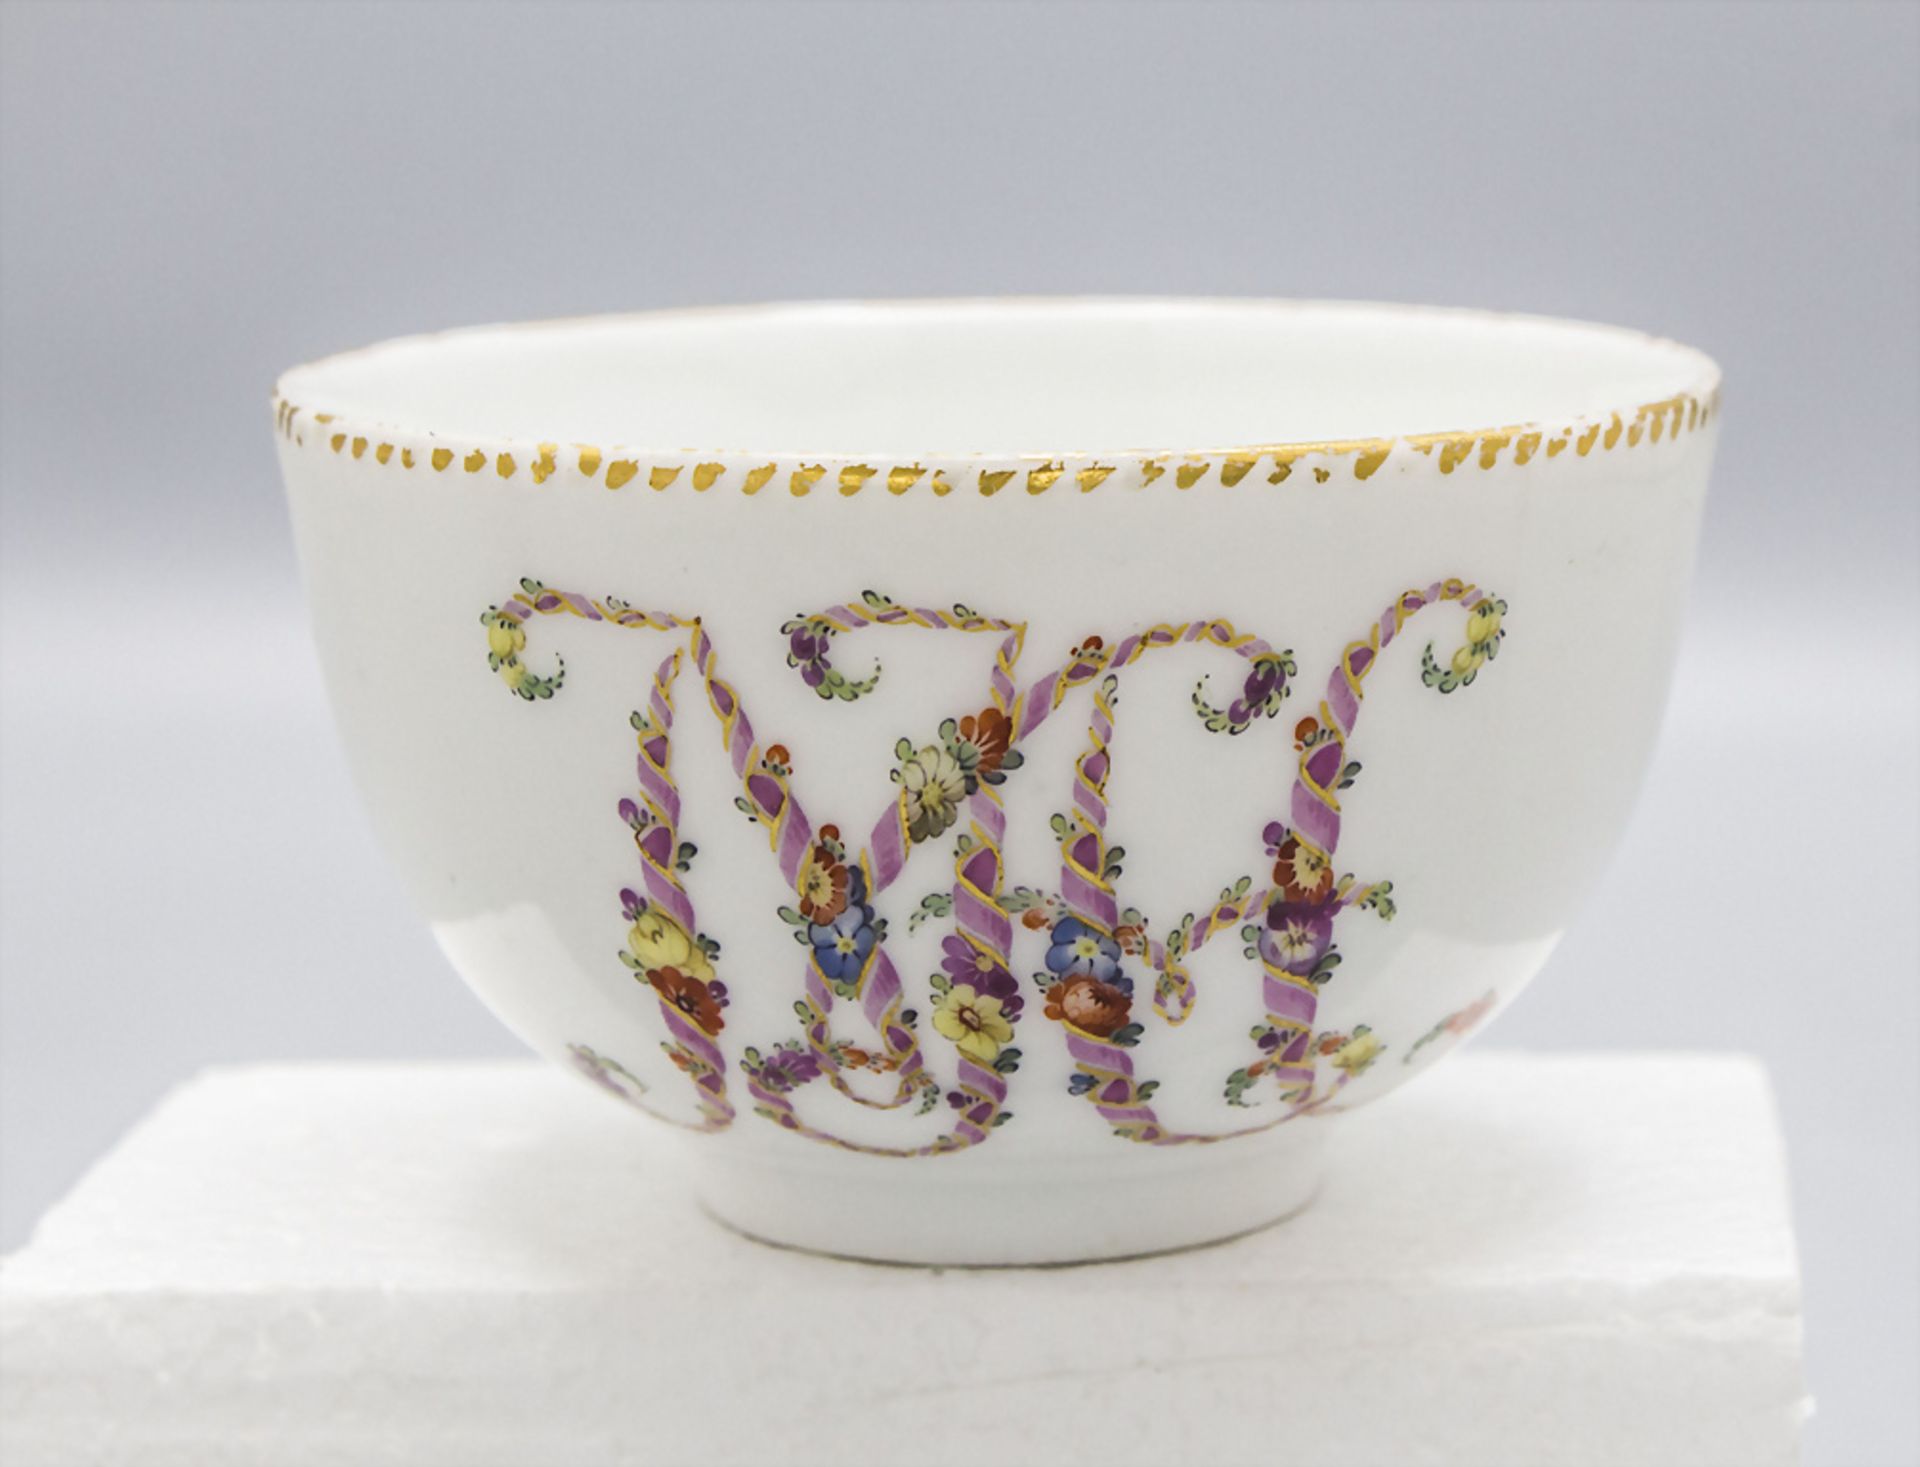 Tasse und Untertasse mit Monogramm 'MH' / A cup and saucer with letters 'MH', KPM Berlin, Ende ... - Image 3 of 7